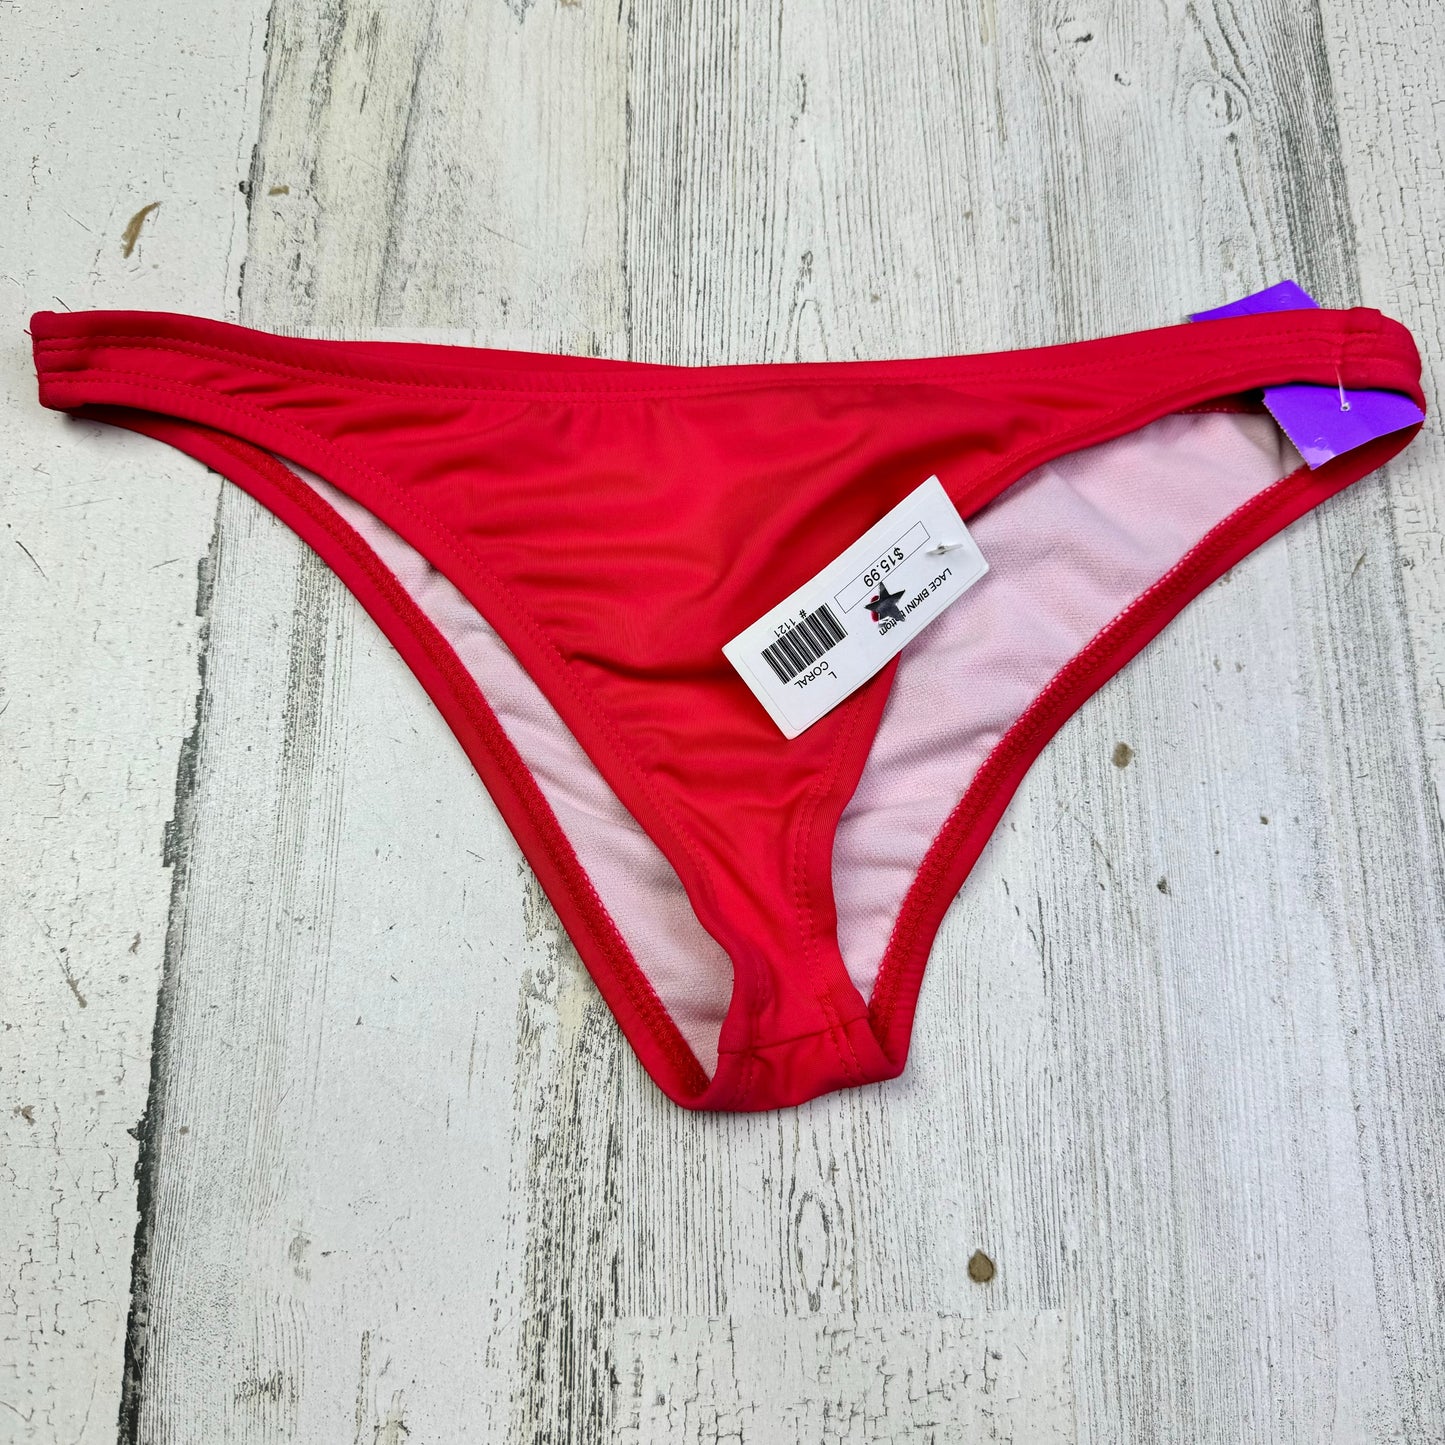 Rose Swimsuit Bottom Clothes Mentor, Size L